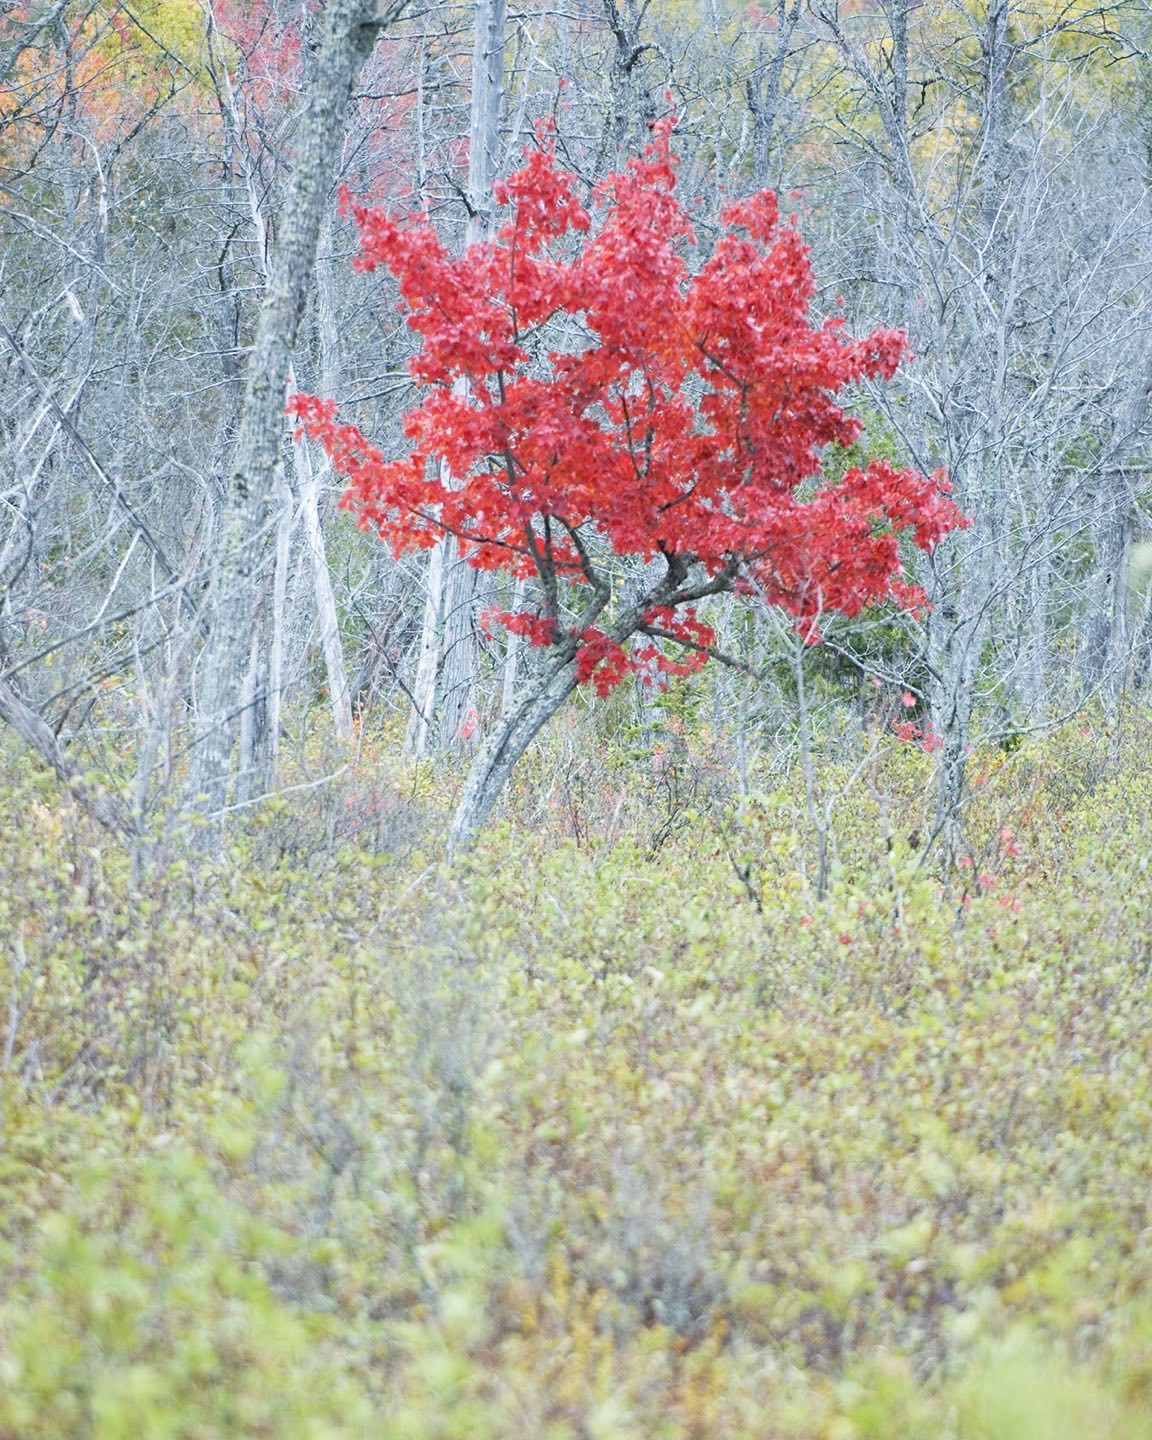 Red Maples (acre rubrum), usually the first tree to show brilliant fall foliage at the edges of bogs and other wetlands, are not sporting the scarlet hues we normally expect this fall. Visits to some of our typical haunts have not been successful with the dull maroon color exhibited. This photo is from a few years ago. #redmaples #acerrubrum #autumnphotographyinmaine #mainefall #mainefoliage